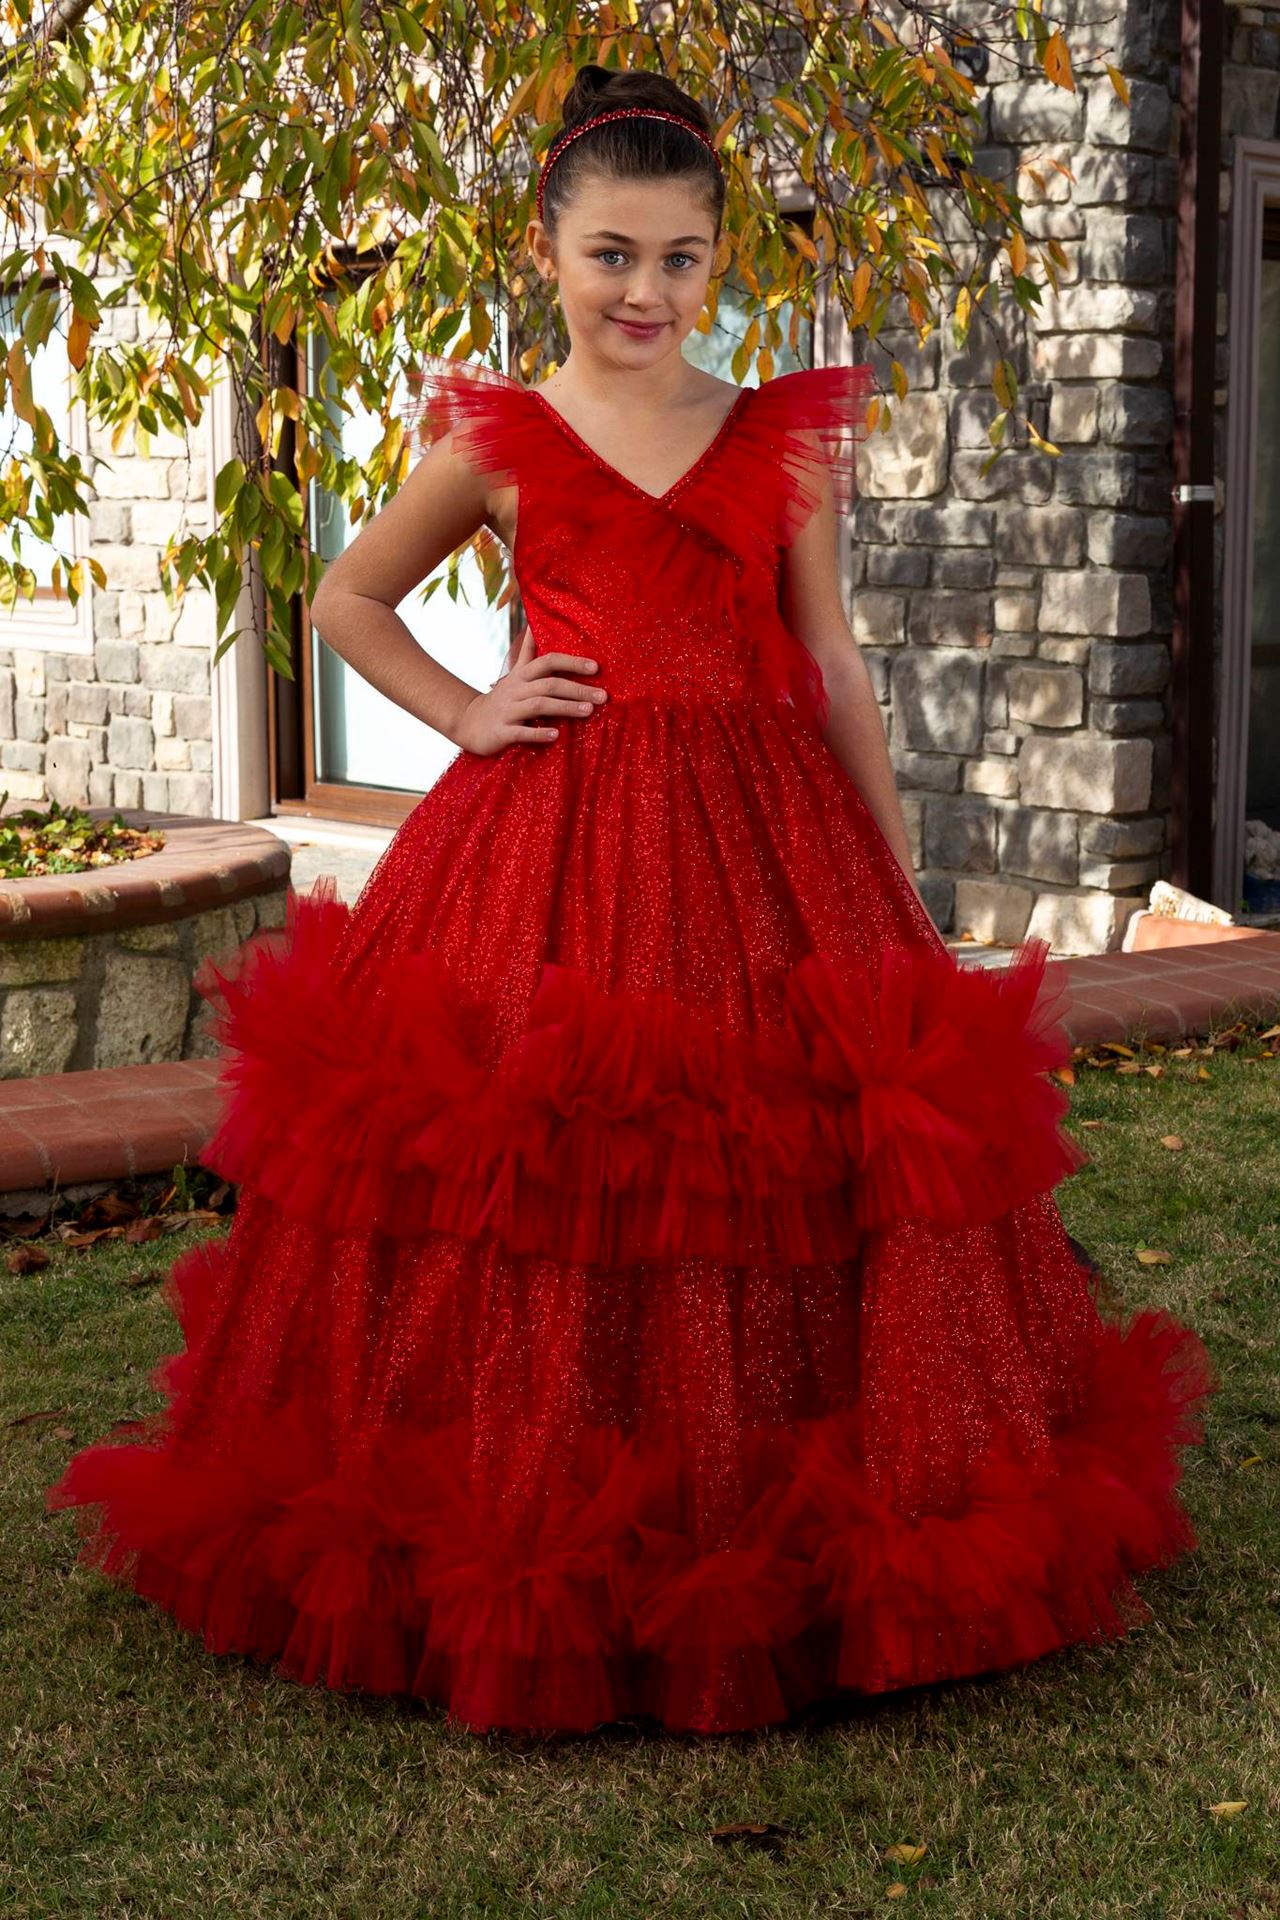 Pixie 7-11 Years Old Girl Dress 30080 Red